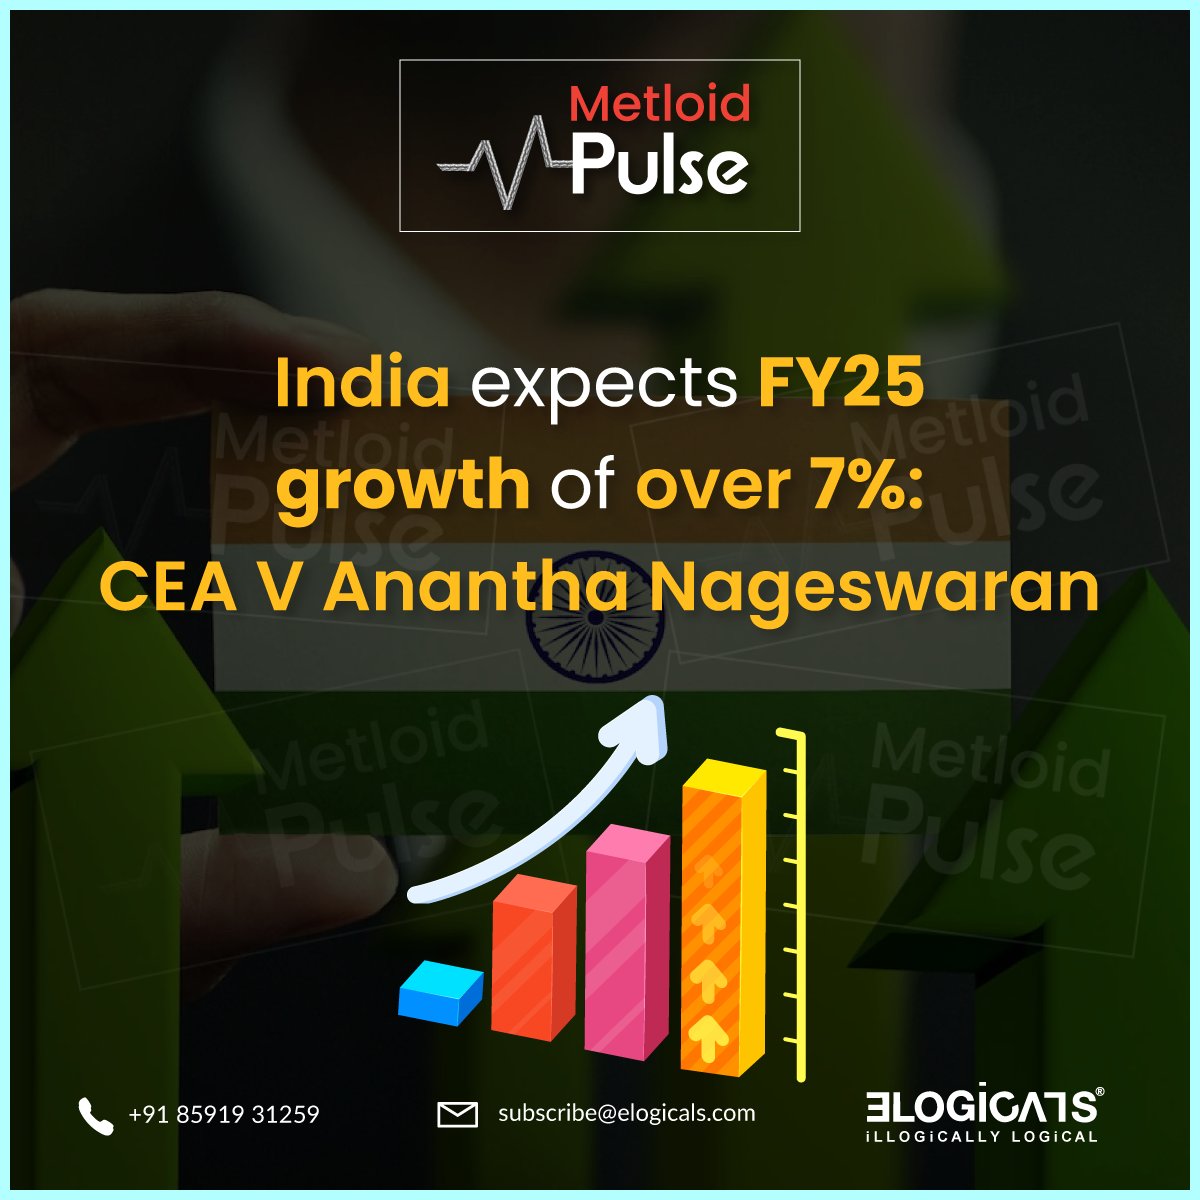 India anticipates a growth exceeding 7% for FY25, according to CEA V Anantha Nageswaran. #IndiaGrowth #CEA #FY25 #TheMetloid #Elogicals